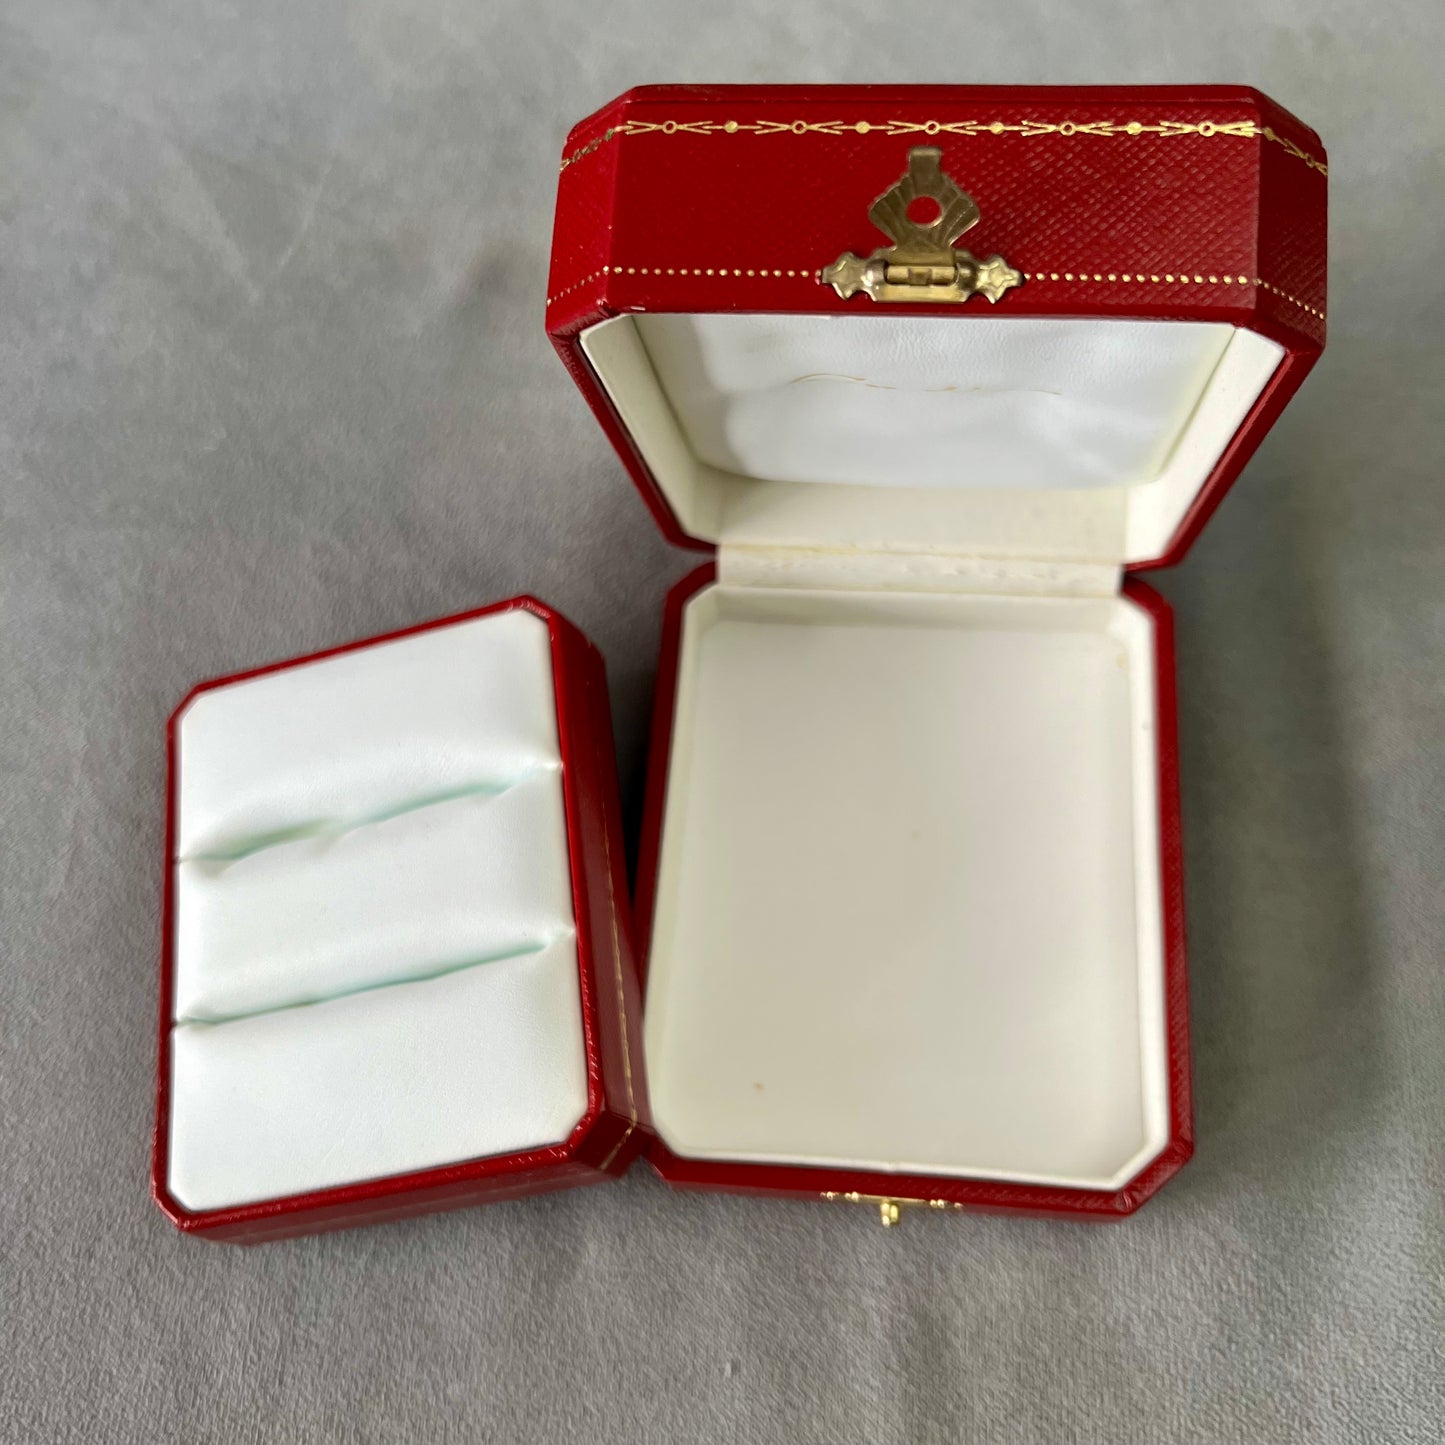 CARTIER Double Alliance Ring Box